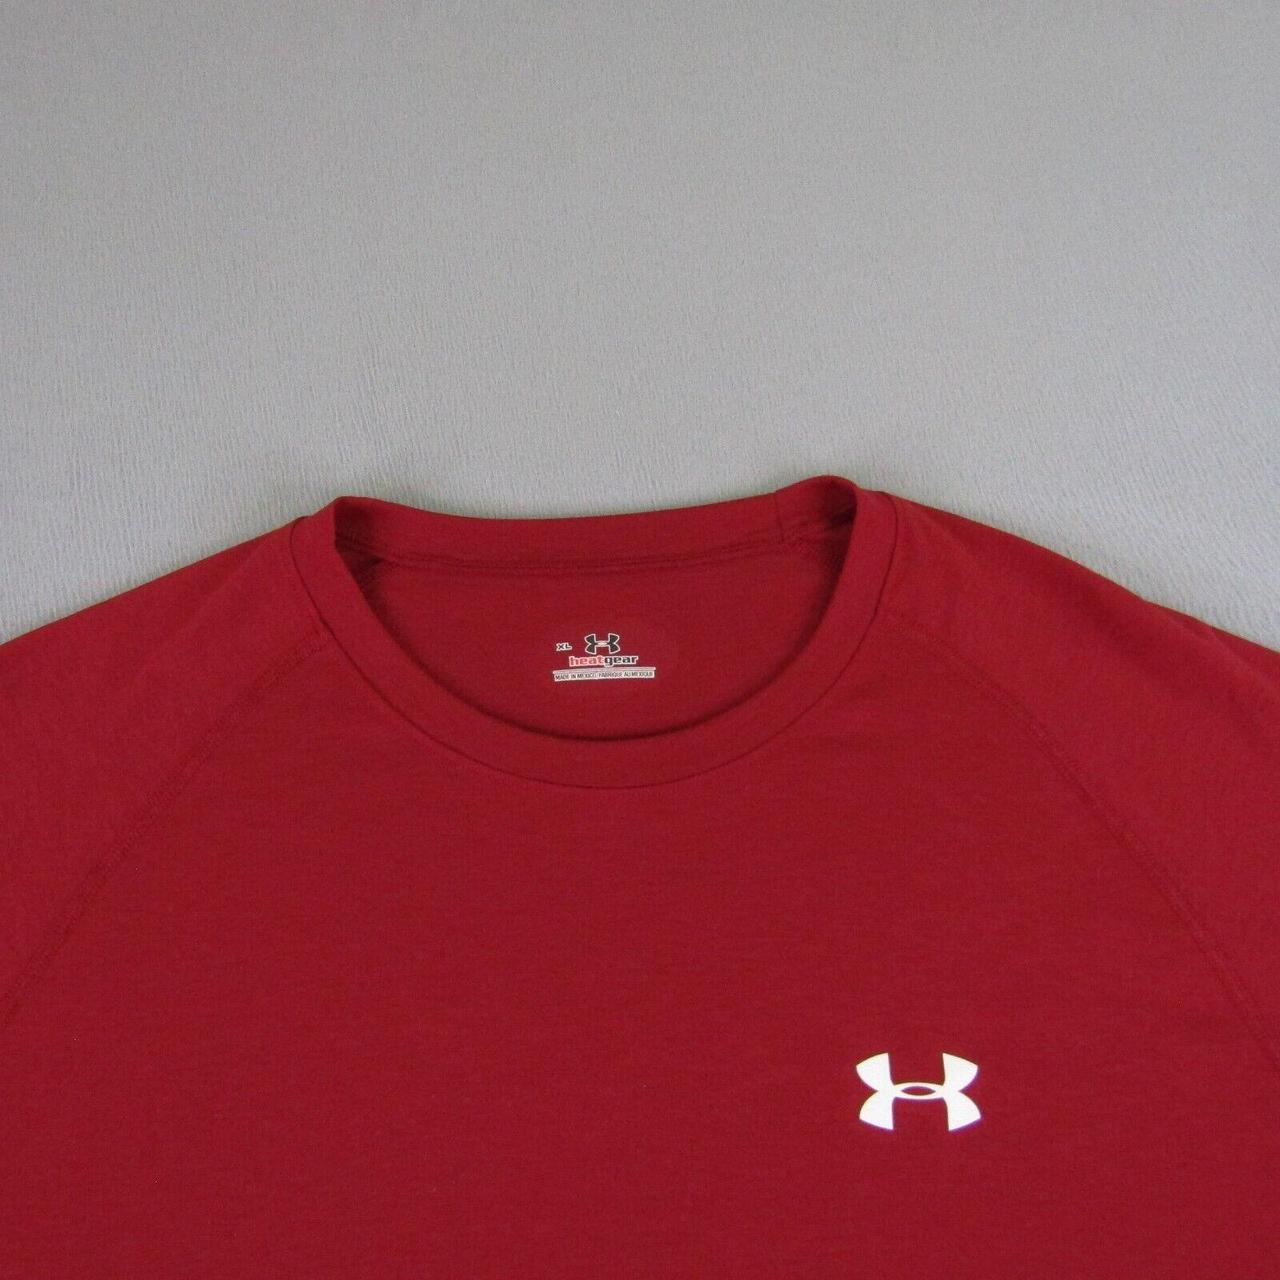 Under Armour Men's Red T-shirt (3)